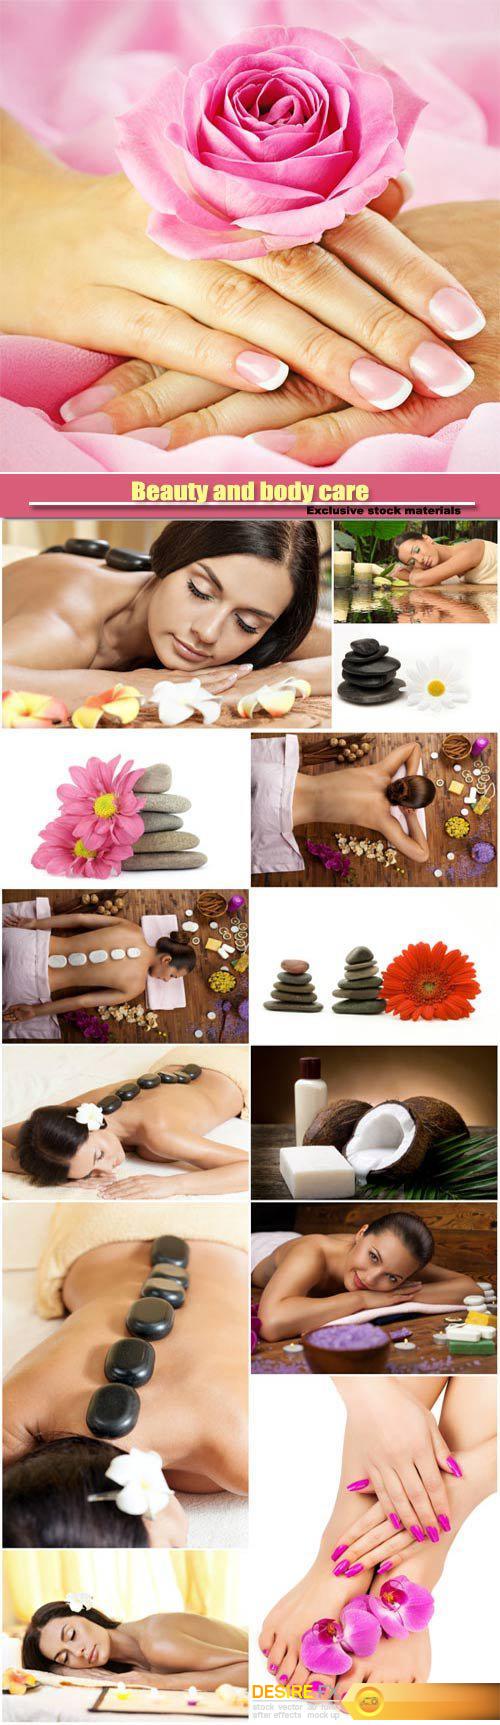 Beauty and body care, the girl in the spa salon